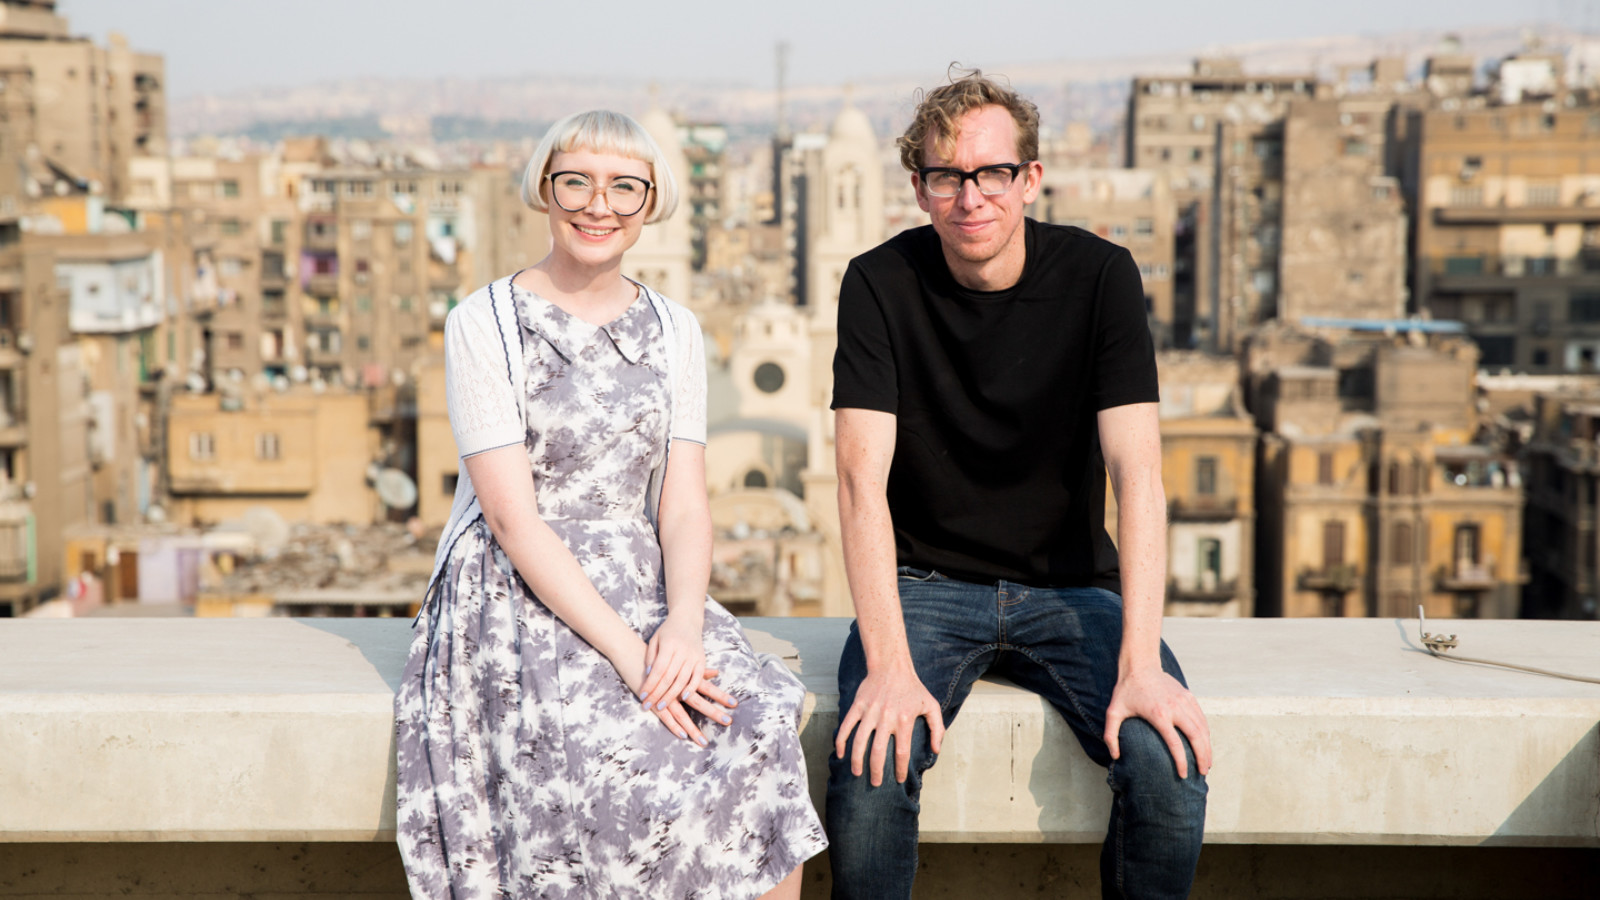 Andy and Beckie sit next to each other on a wall. Behind them is a cityscape full of multi-story buildings.